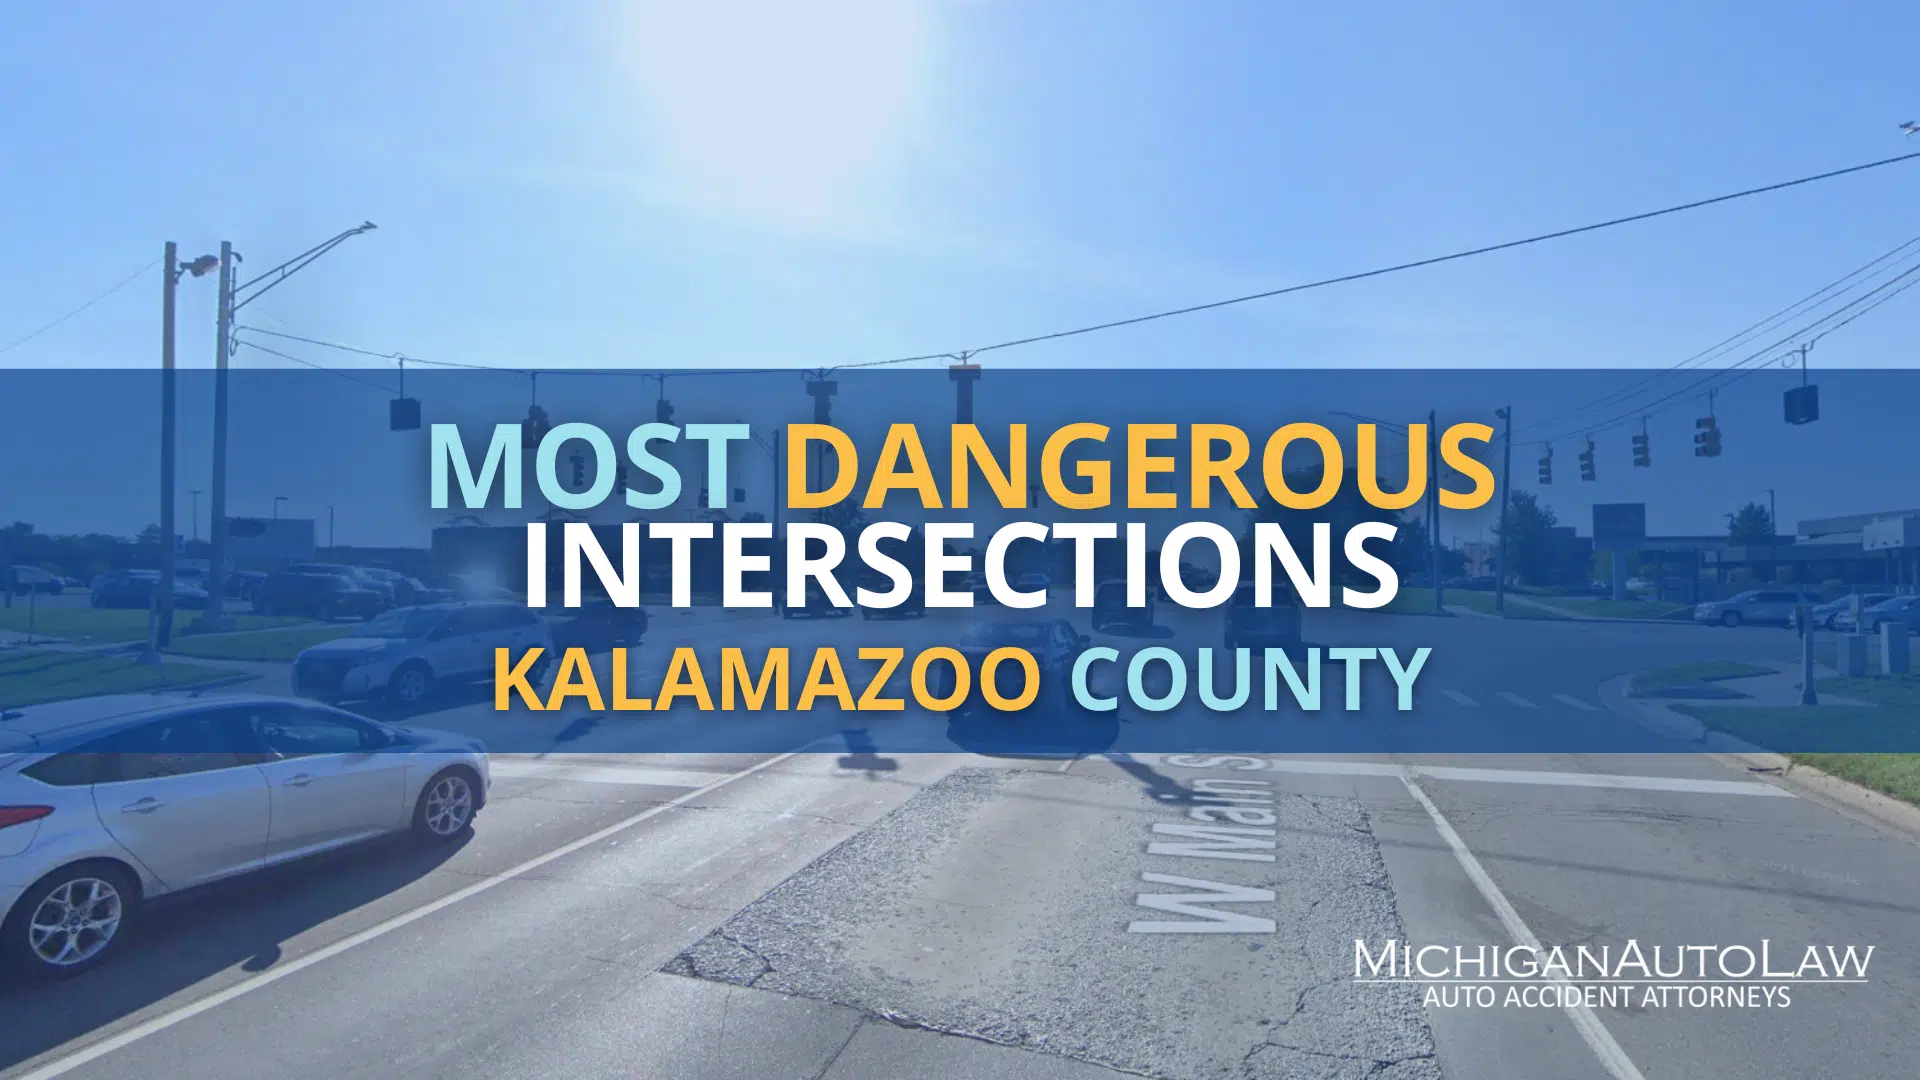 Kalamazoo County’s Most Dangerous Intersections in 2021